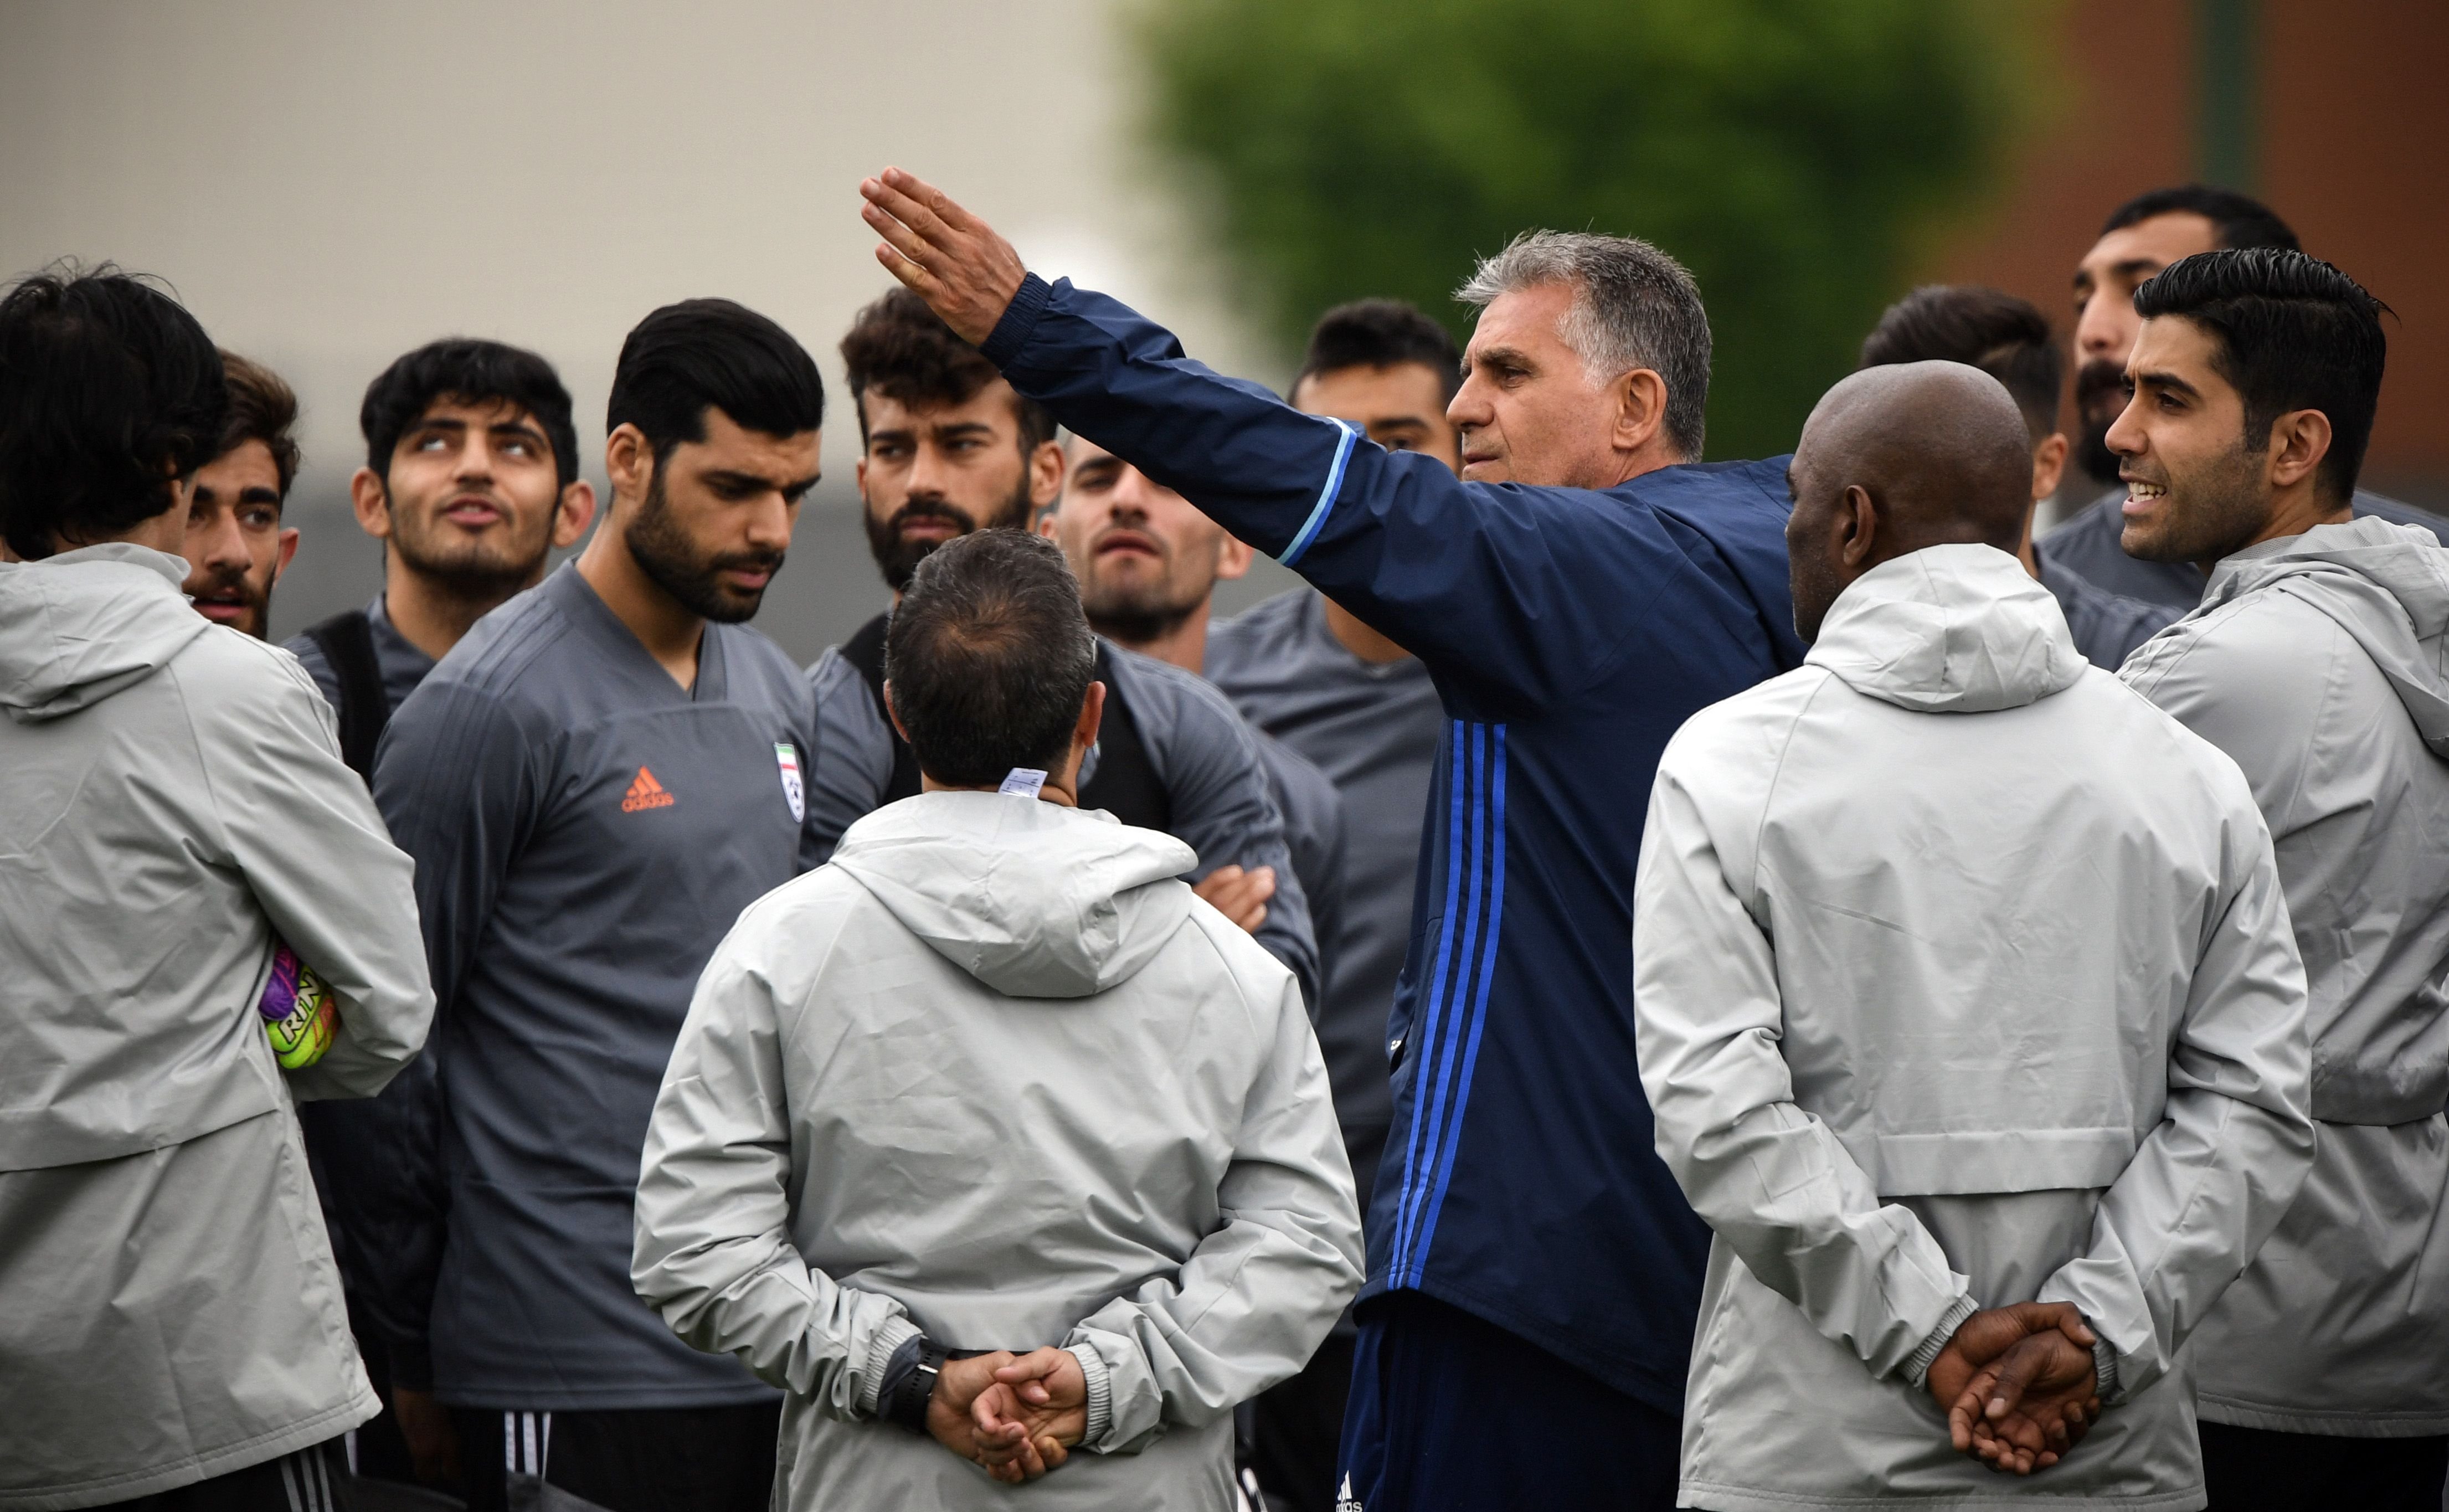 Iran's Portuguese coach Carlos Queiroz gestures as he talks to his players a training session in Bakovka outside Moscow on June 12, 2018, ahead of the Russia 2018 World Cup tournament.